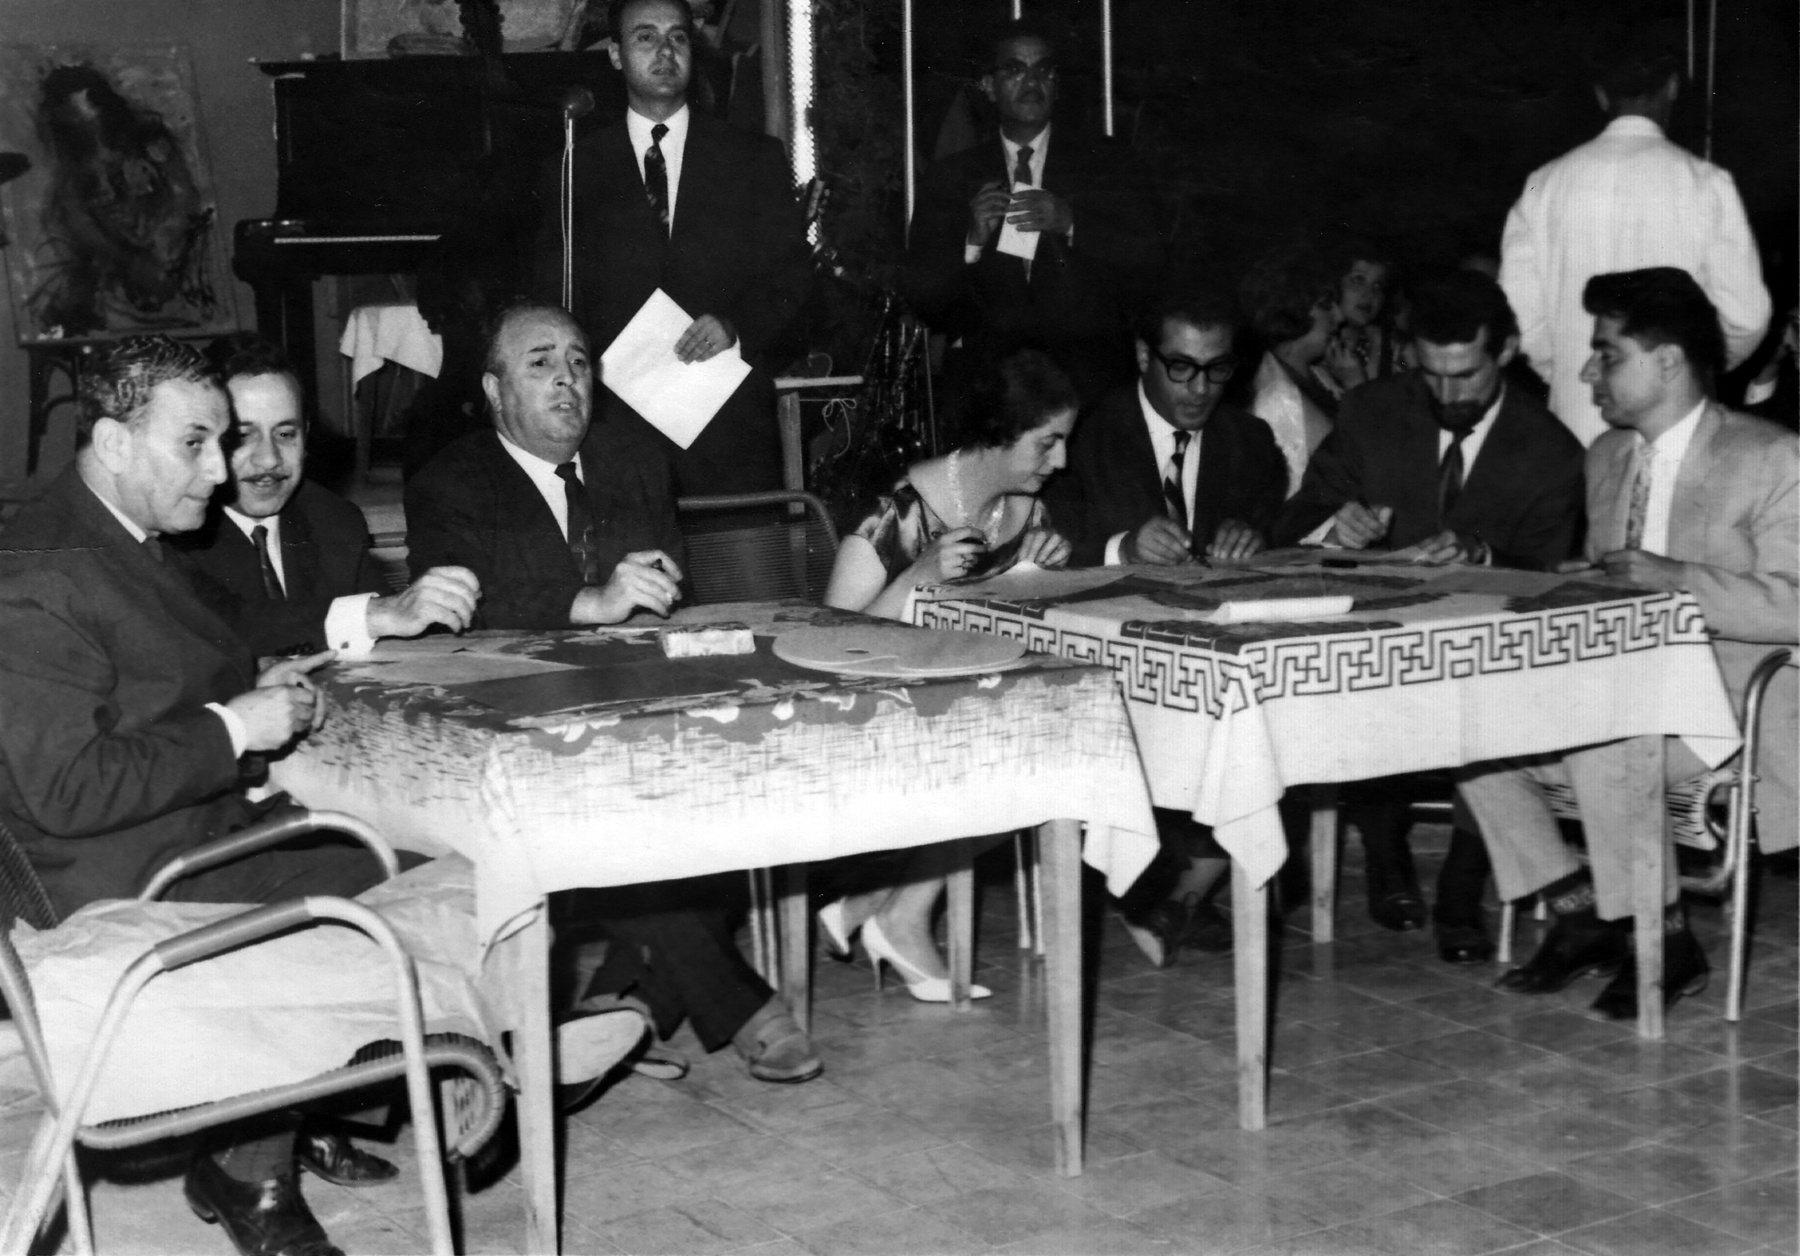 Jury supervising choosing&nbsp;artists&rsquo;&nbsp;muse&nbsp;at the Orient Club&nbsp;in Damascus, 20 July 1961. (from right) Naim Ismail (visual artist),&nbsp;Louay Kayyali (visual artist),&nbsp;Dr. Salman Kattaya (art critic),&nbsp;Derrie Fakhoury Hammad (female&nbsp;visual artist), Dr. Salim Adel Abdulhak (director of the Department of Archaeology and Museums),&nbsp;Dr. Afif Bahnassi&nbsp;(head of the Directorate of Visual Art&nbsp;at Ministry of Culture and National Guidance),&nbsp;Khaled Moaz (visual artist), and (back) Fadil Al-Siba&rsquo;I (novelist).